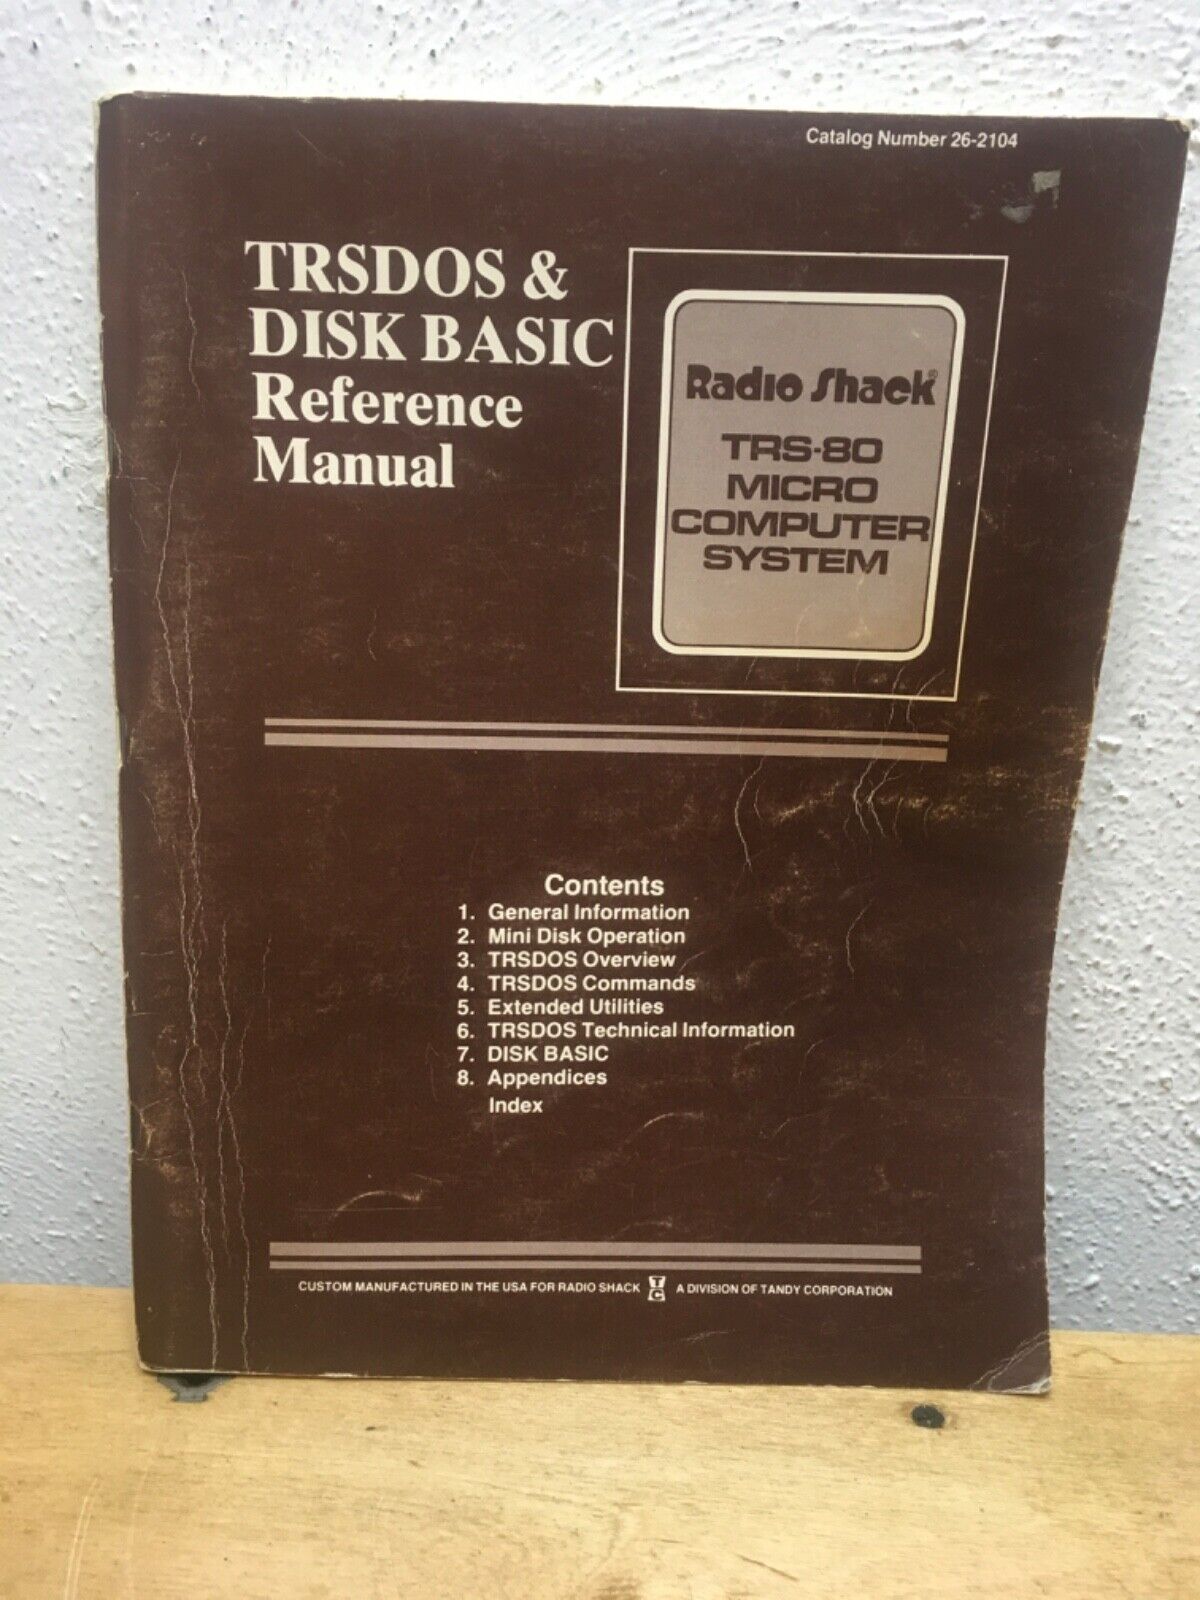 TRS-80 Micro Computer manual TRSDOS Complete First Edition 1979#b-23